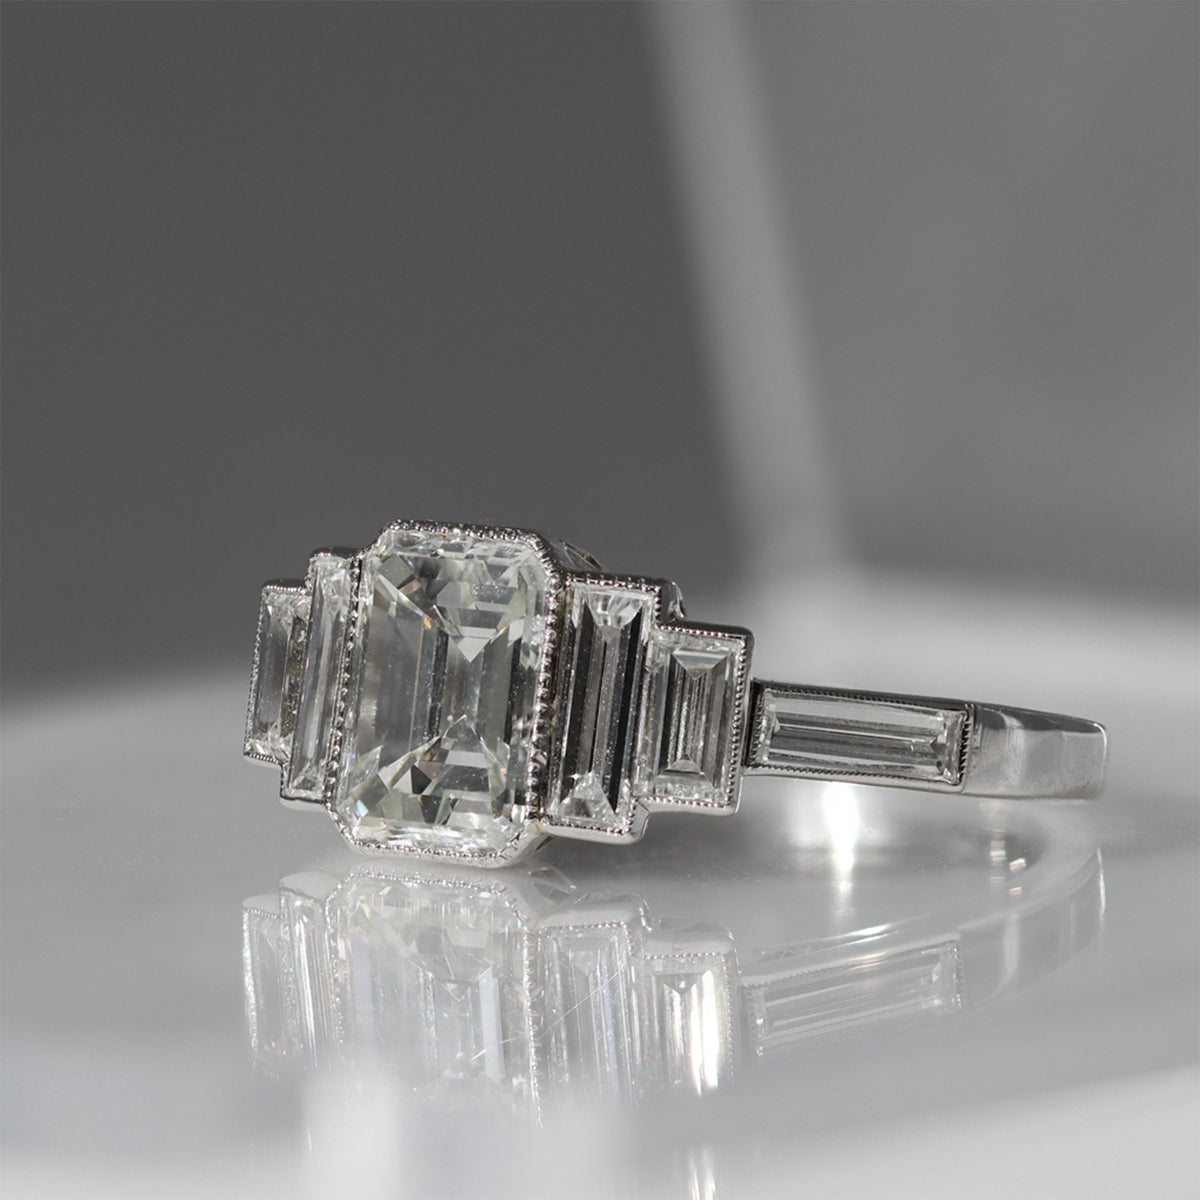 An Elegant Emerald-cut Diamond Ring with side baguettes set in Platinum reflection view